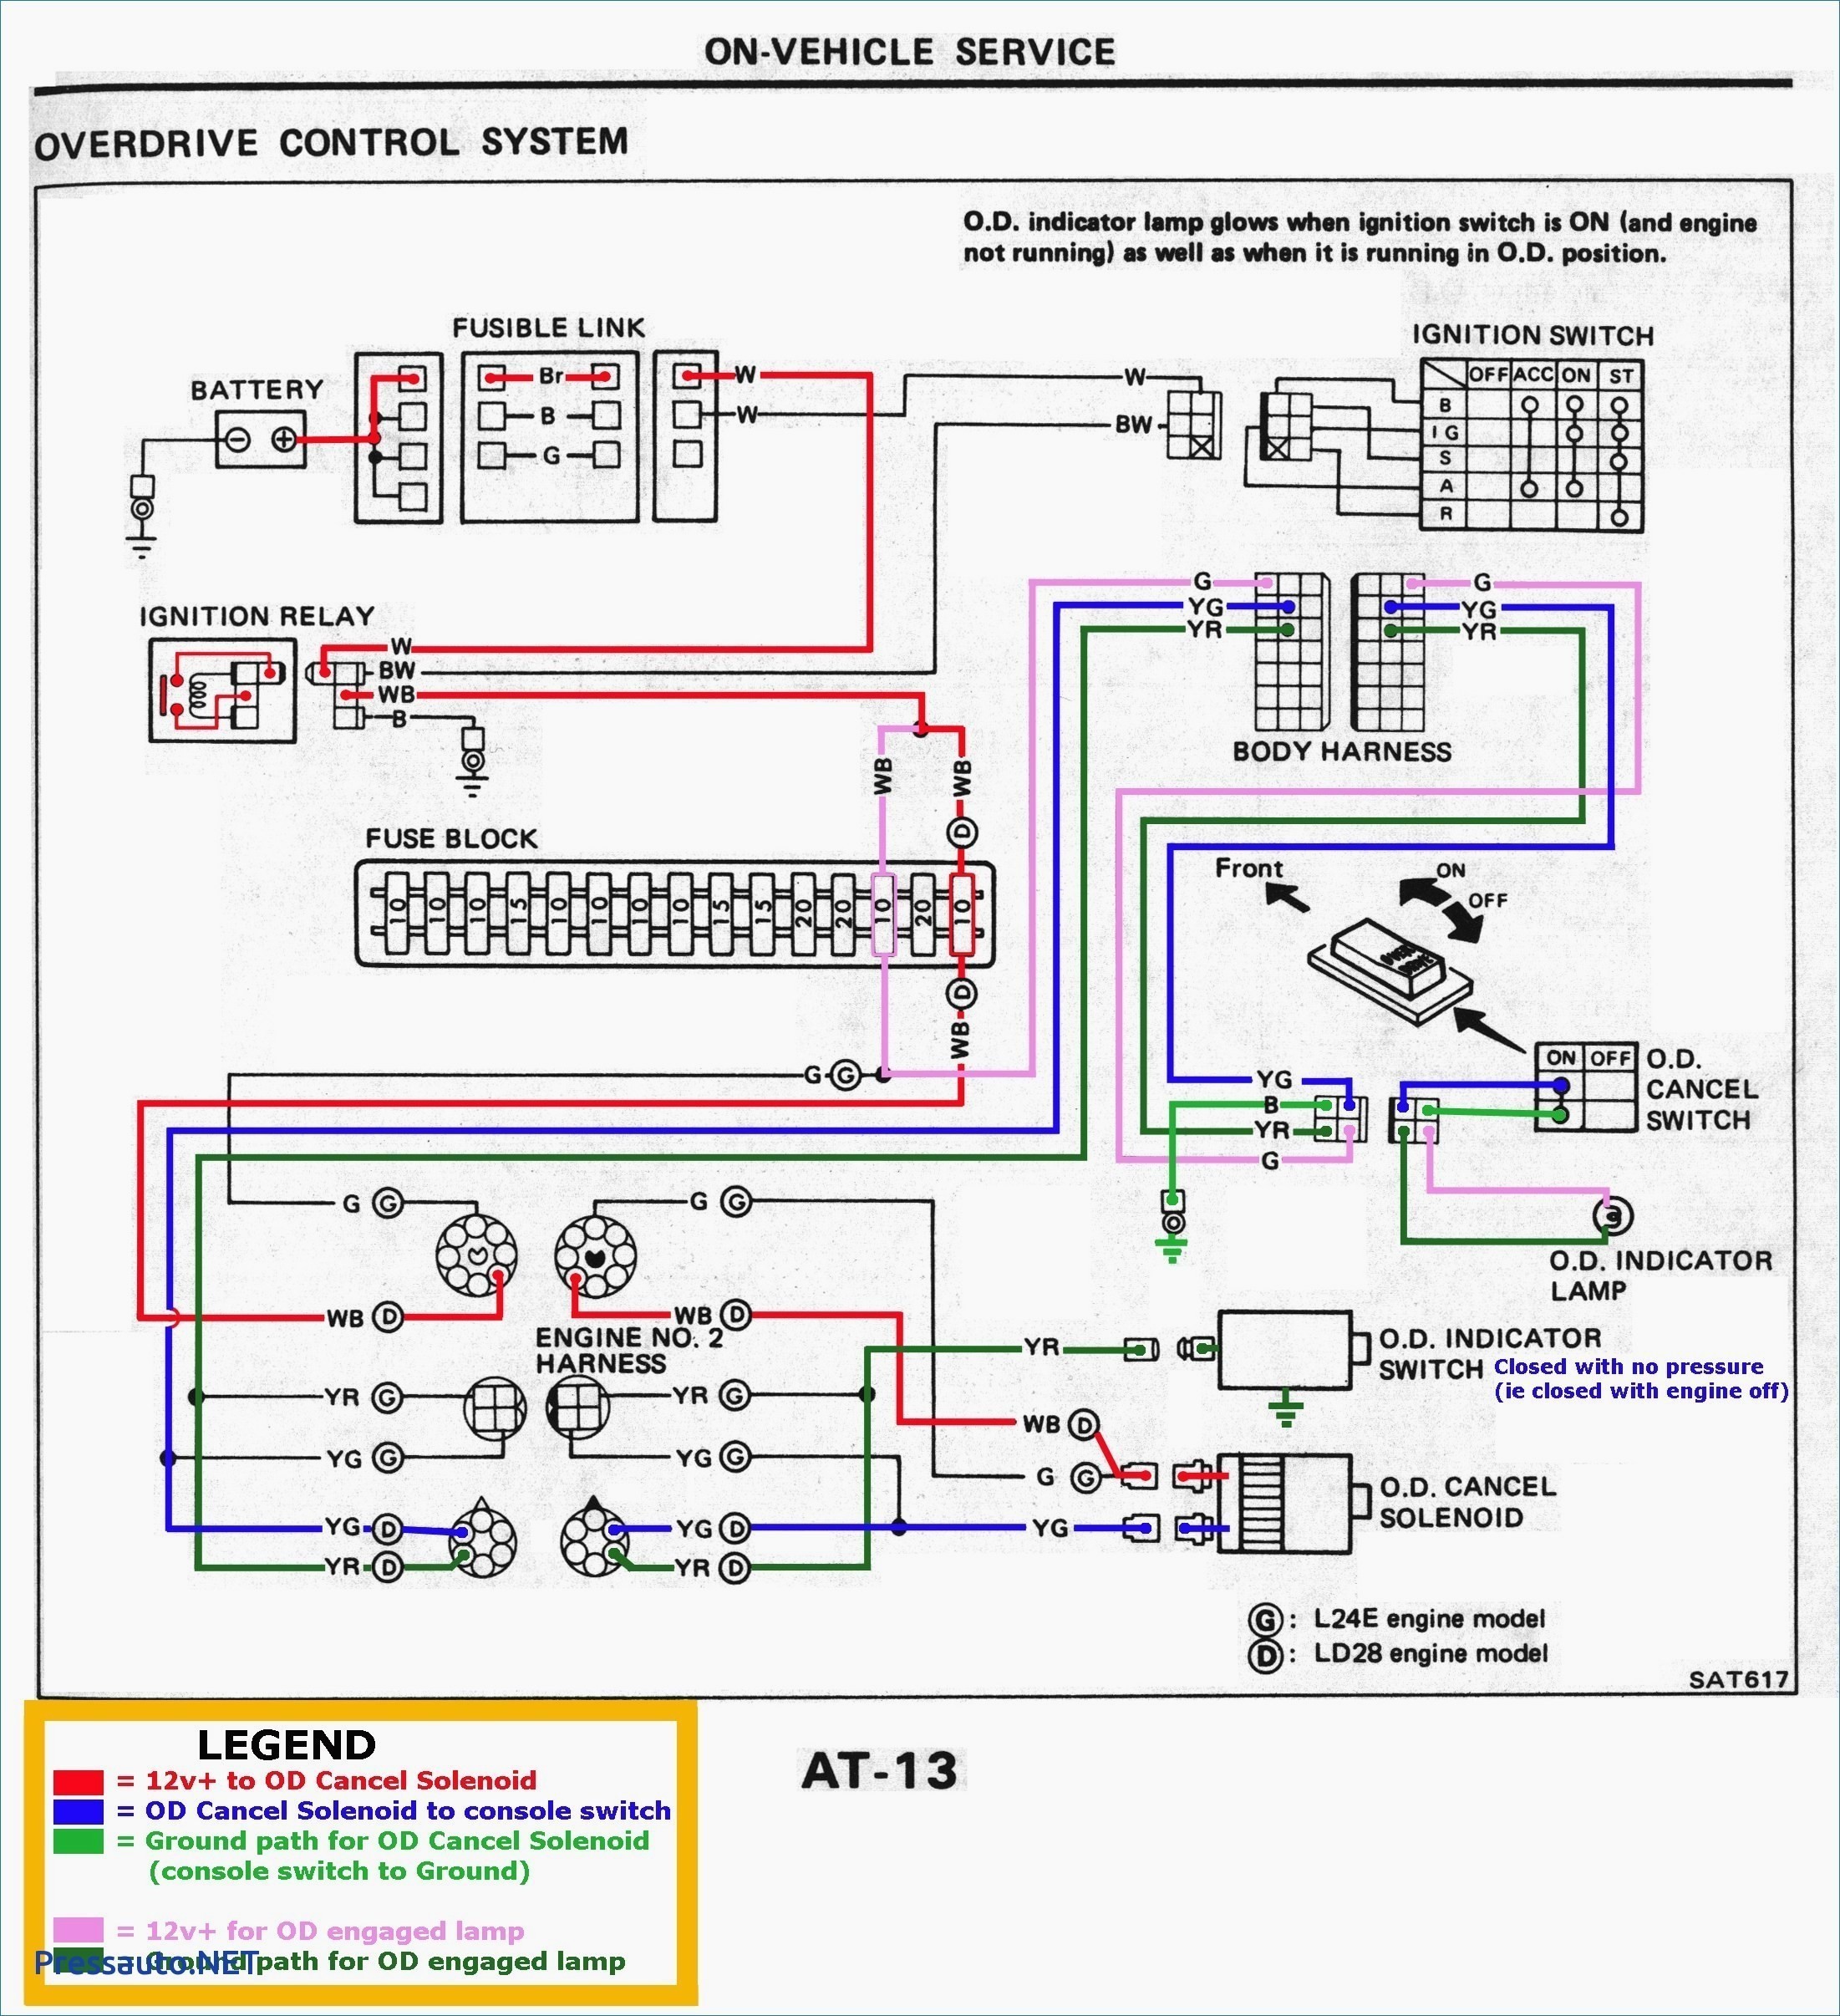 Wiring Diagram for Diesel Ignition Switch Best Wiring Diagram for Universal Ignition Switch Refrence Ignition